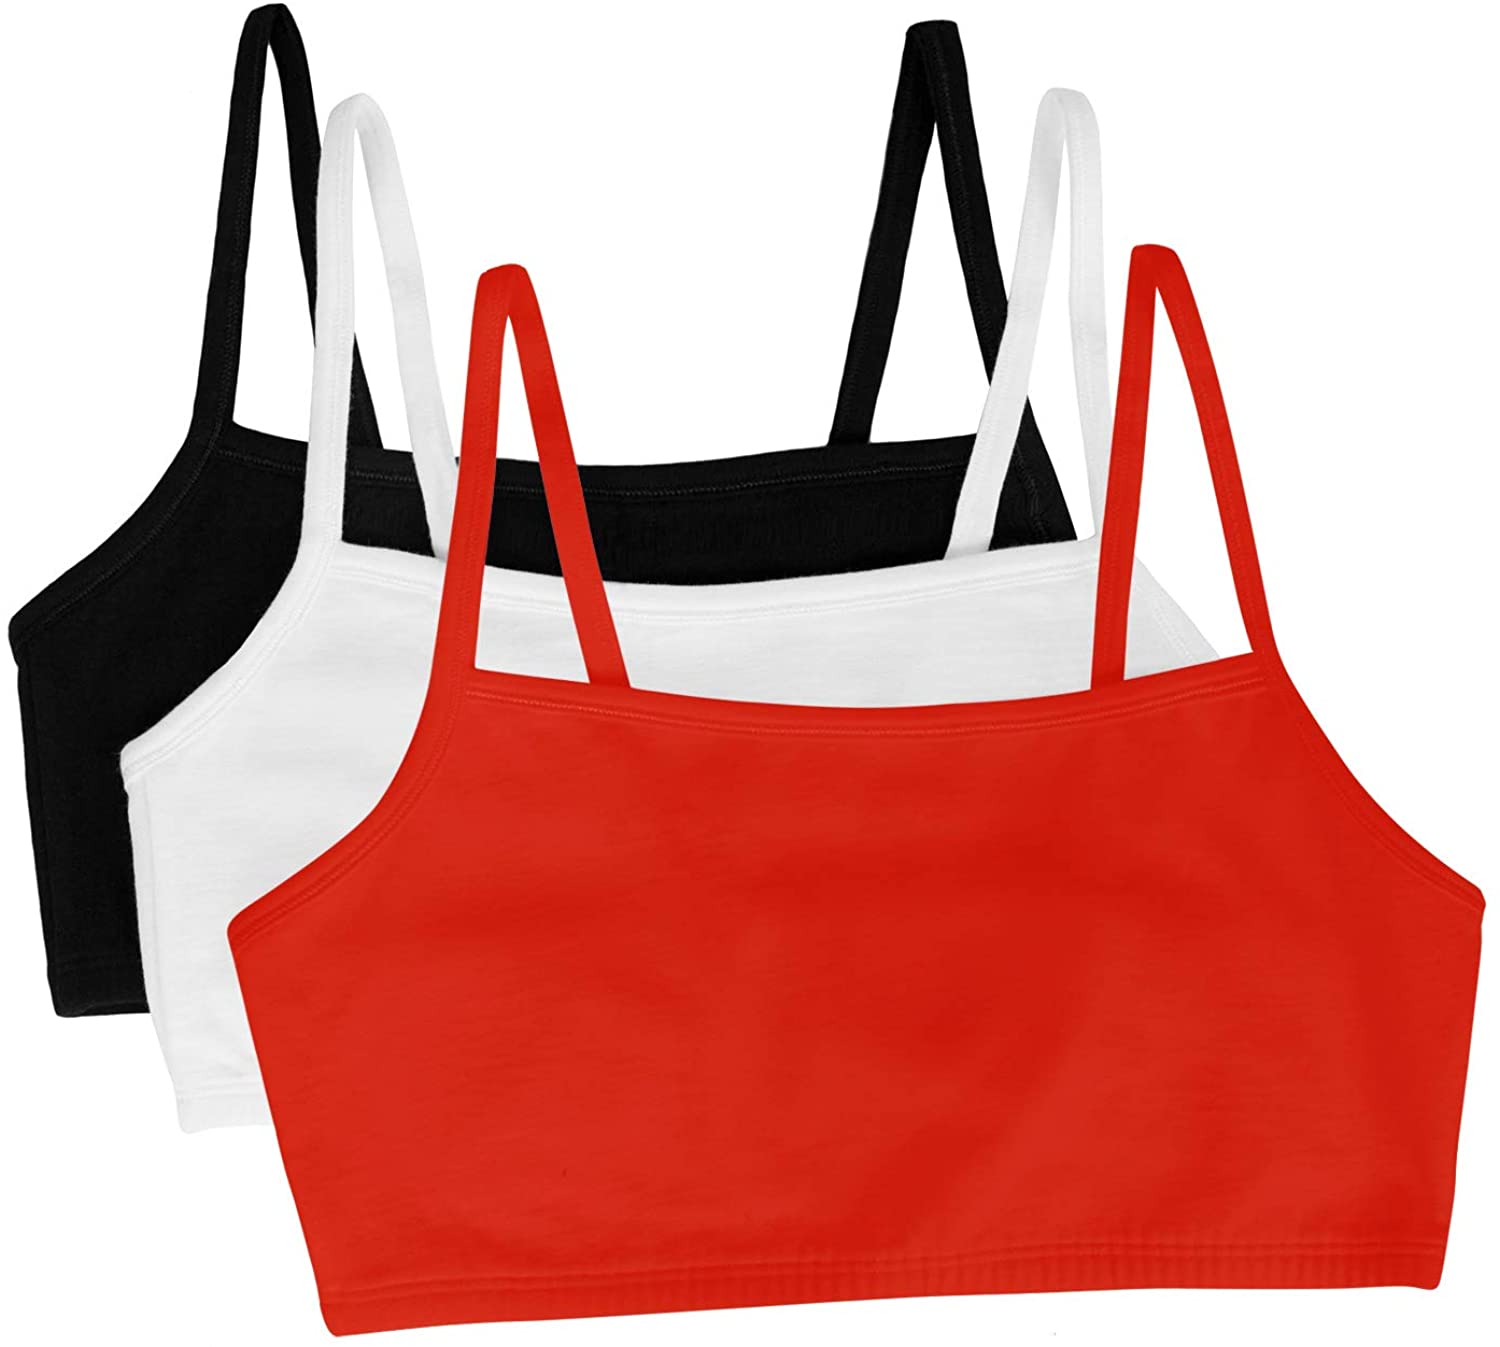 Fruit of The Loom Women's Spaghetti Strap Cotton Pull Over 3 Pack Sports  Bra